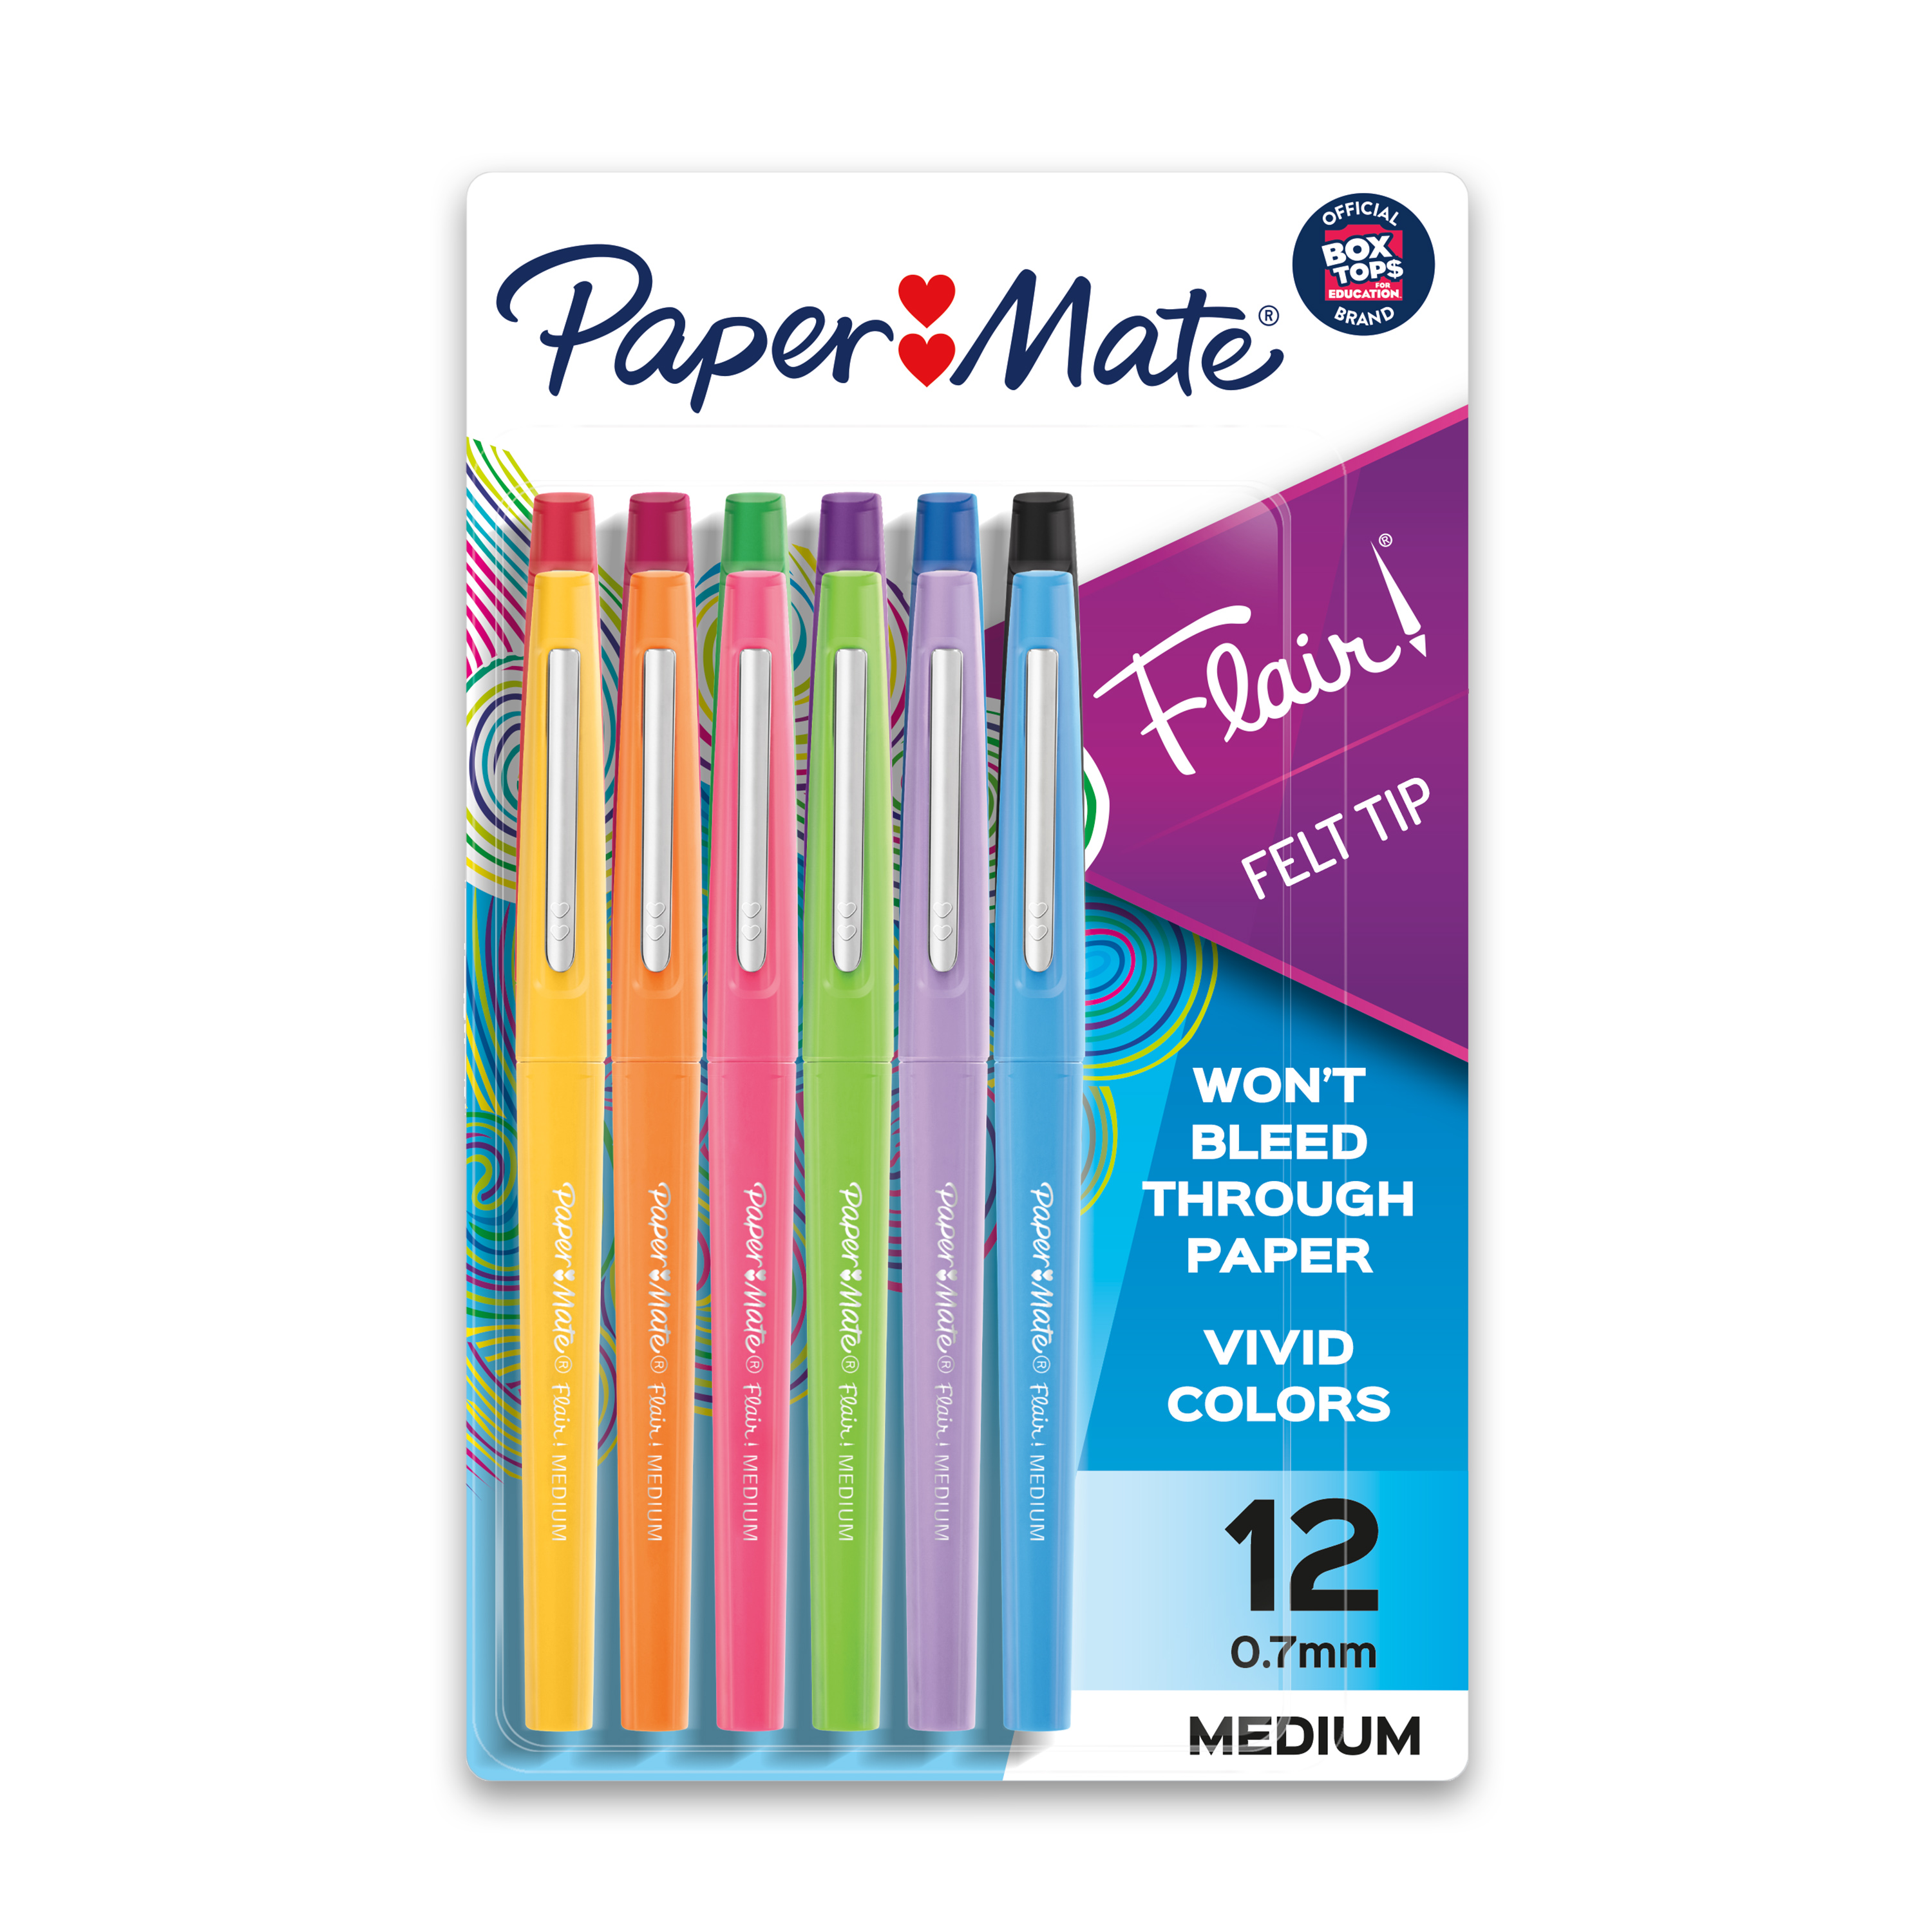 Paper Mate Flair Felt Tip Pens, Medium Point (0.7mm), Assorted Colors, 12 Count - image 1 of 11